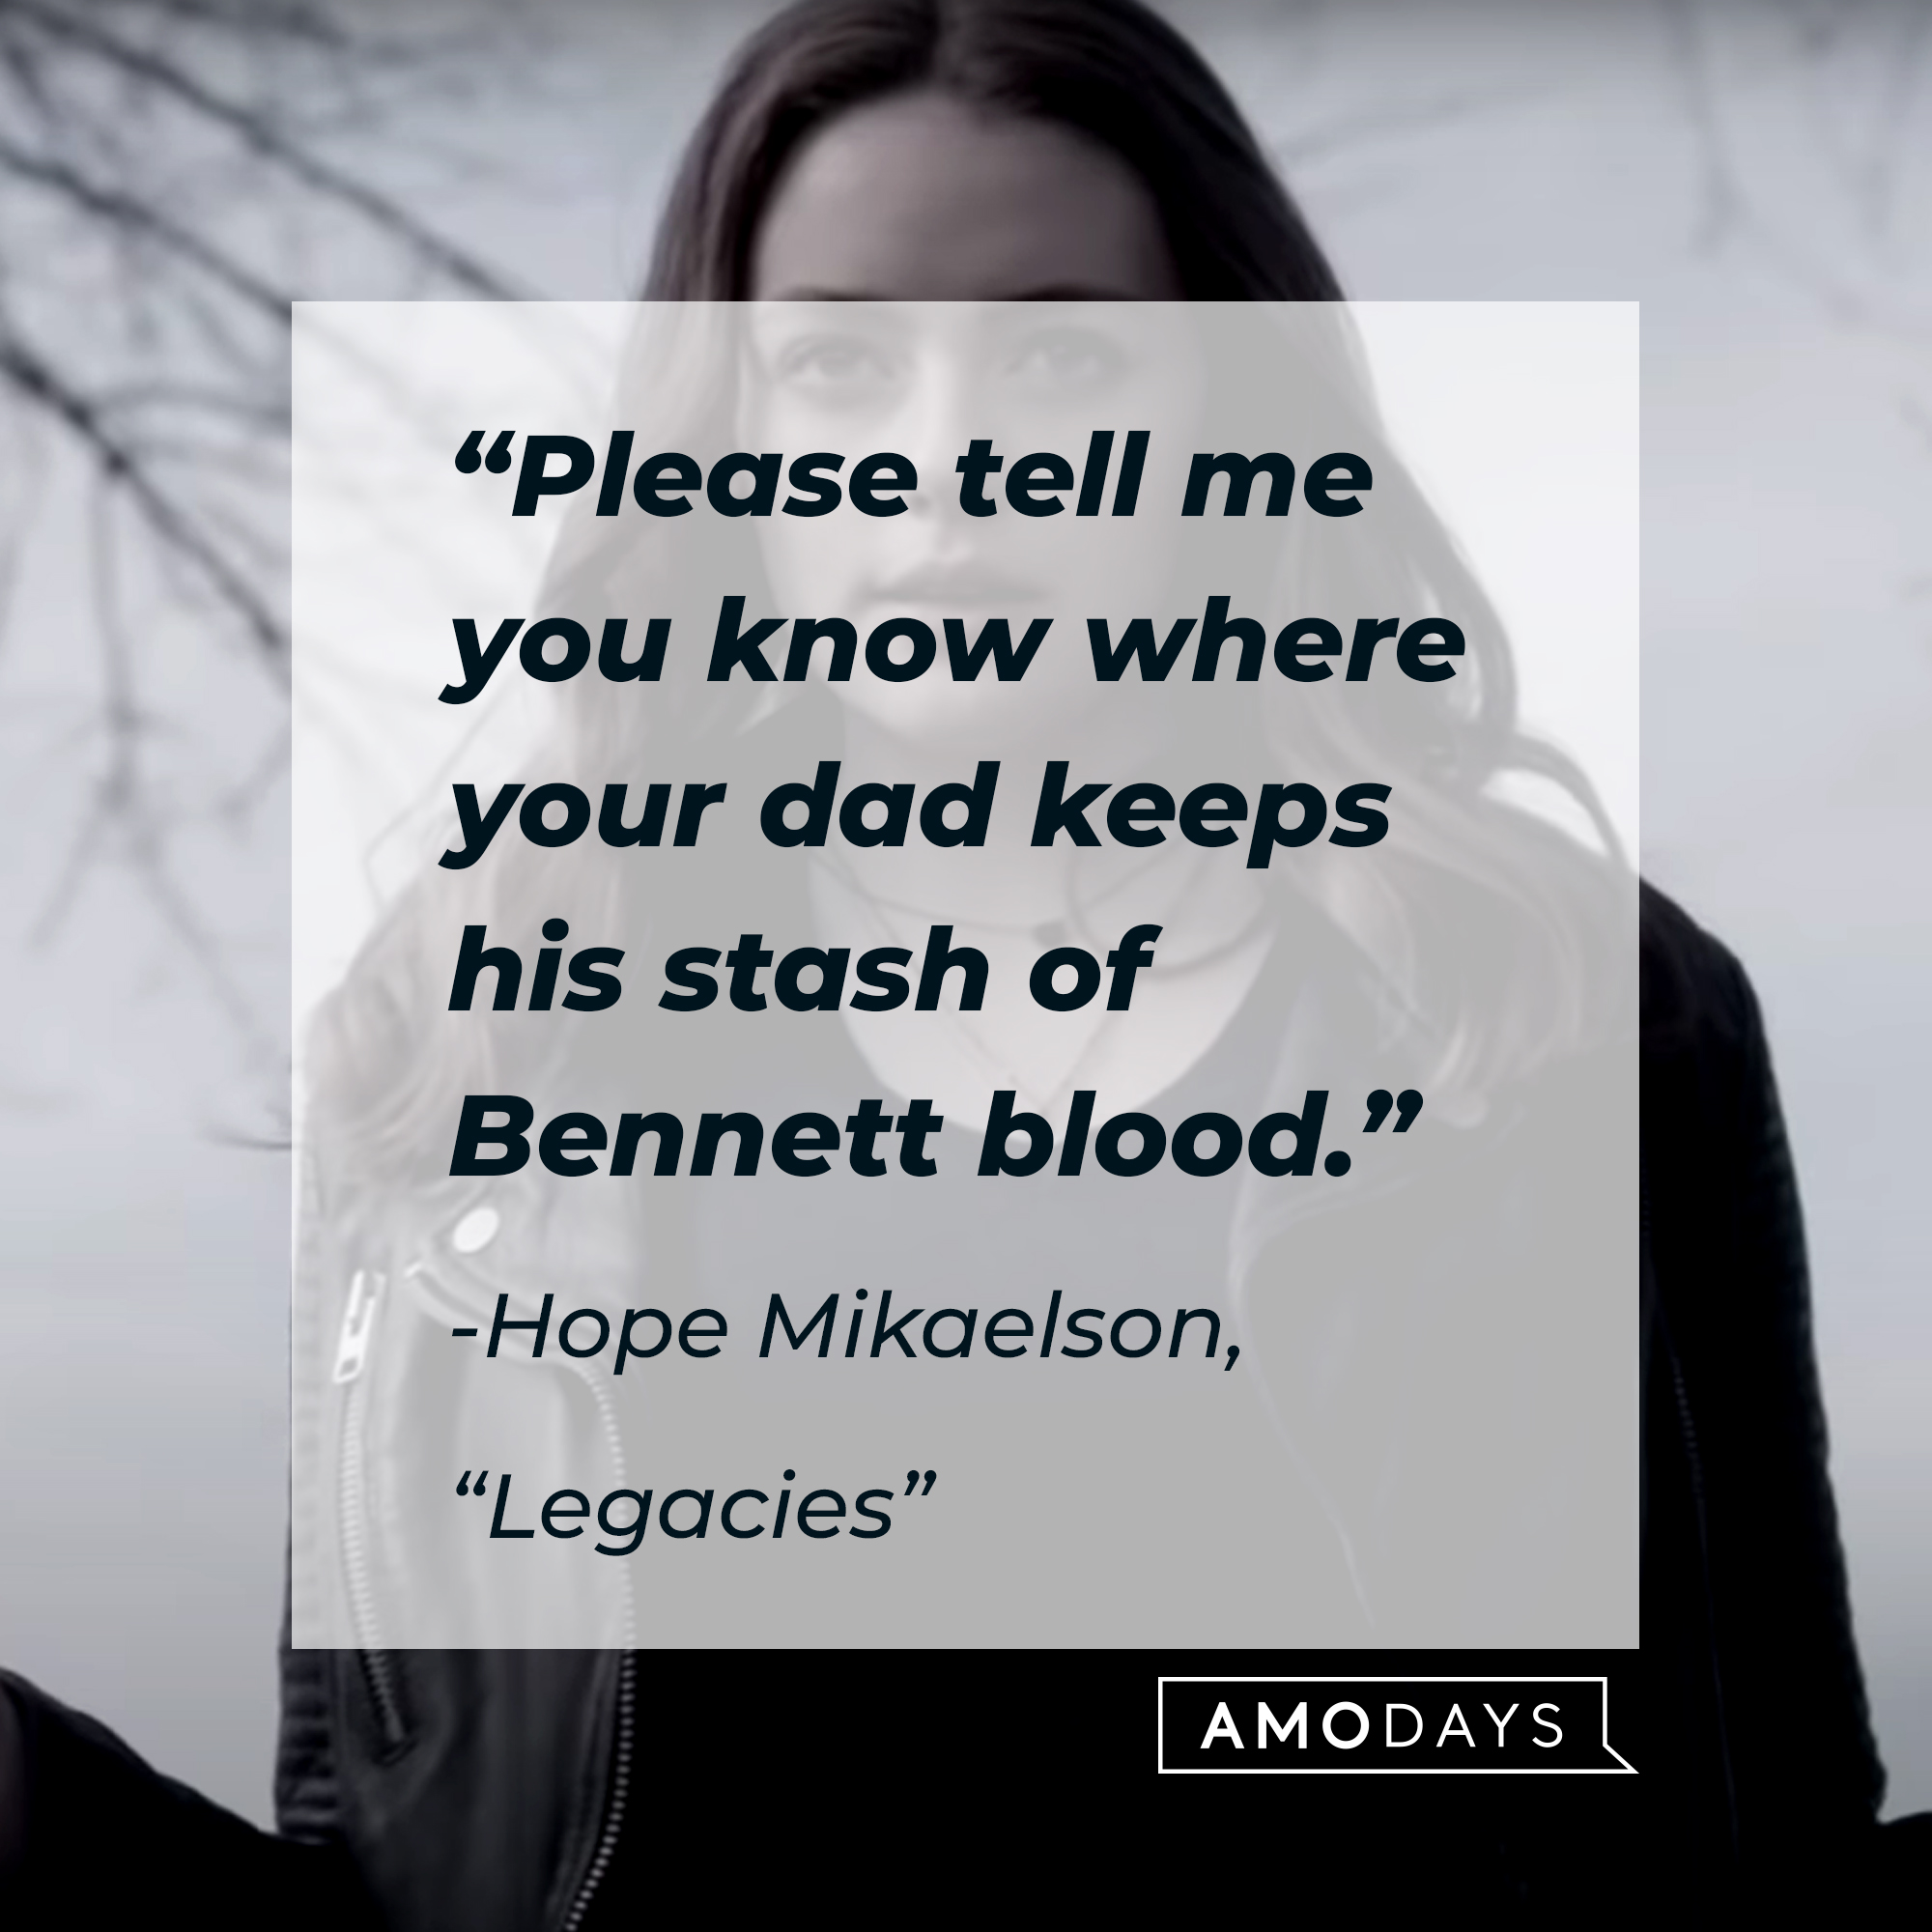 Hope Mikaelson with her quote: “Please tell me you know where your dad keeps his stash of Bennett blood.” | Source: Facebook.com/CWLegacies